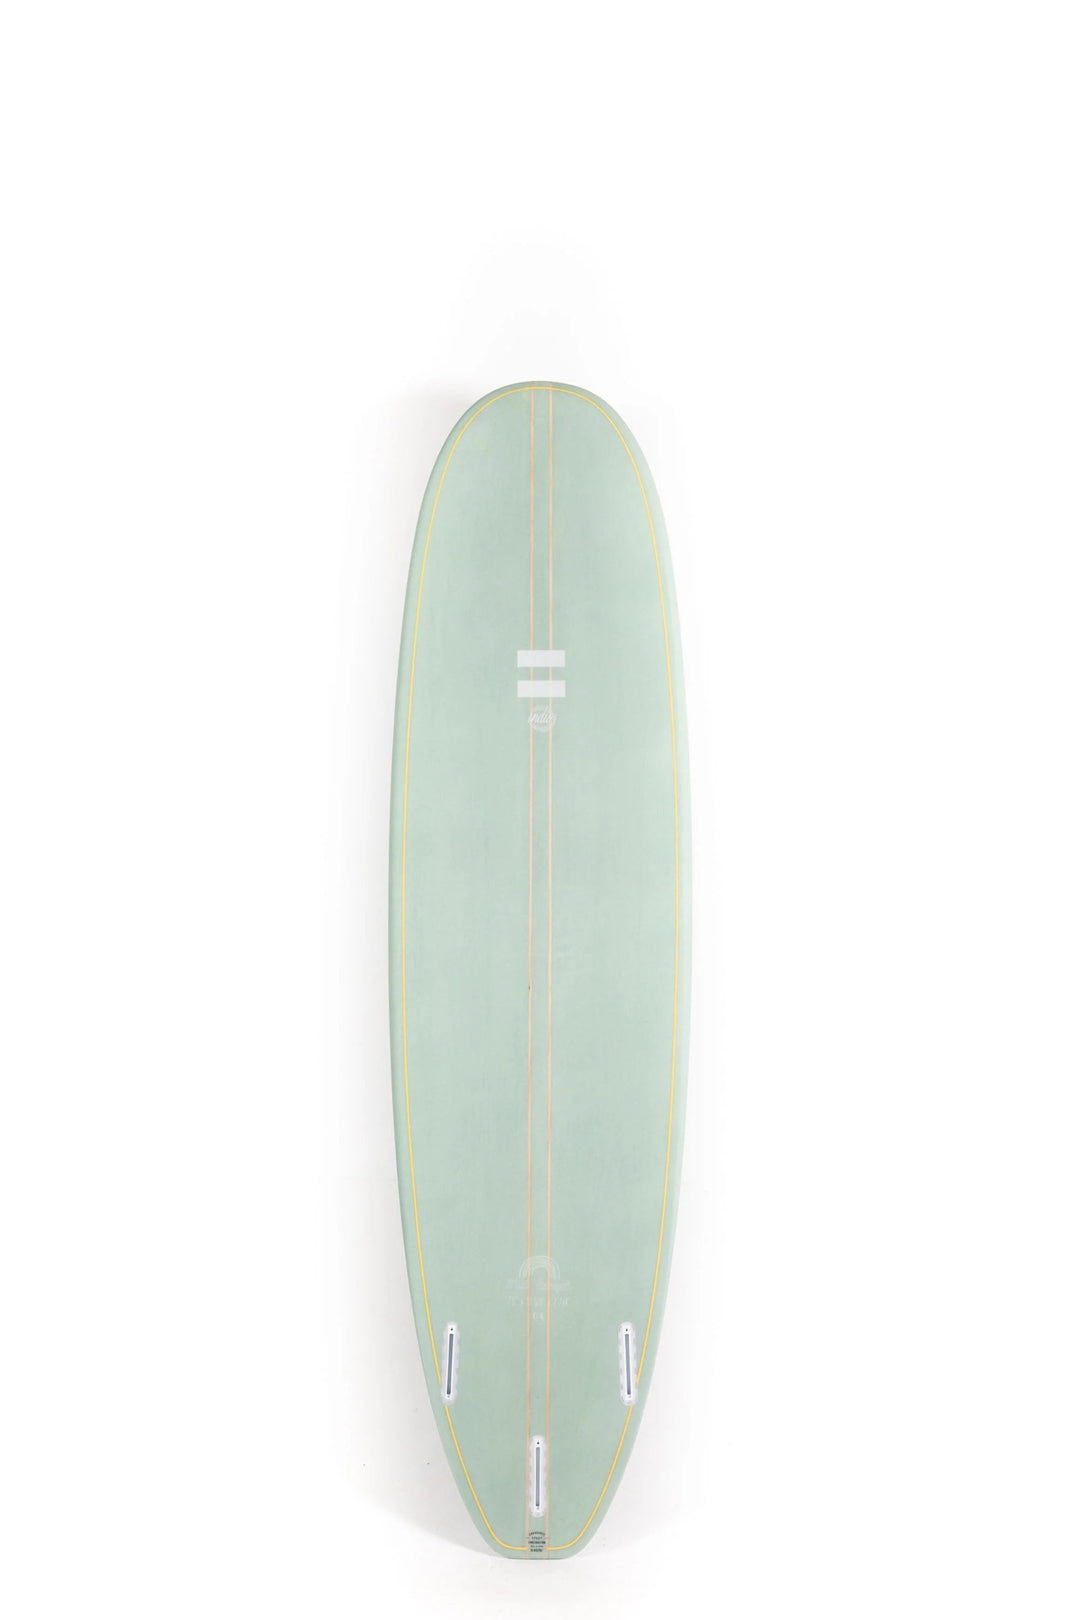 Indio Surfboards Mid Length 7'0" - MInt